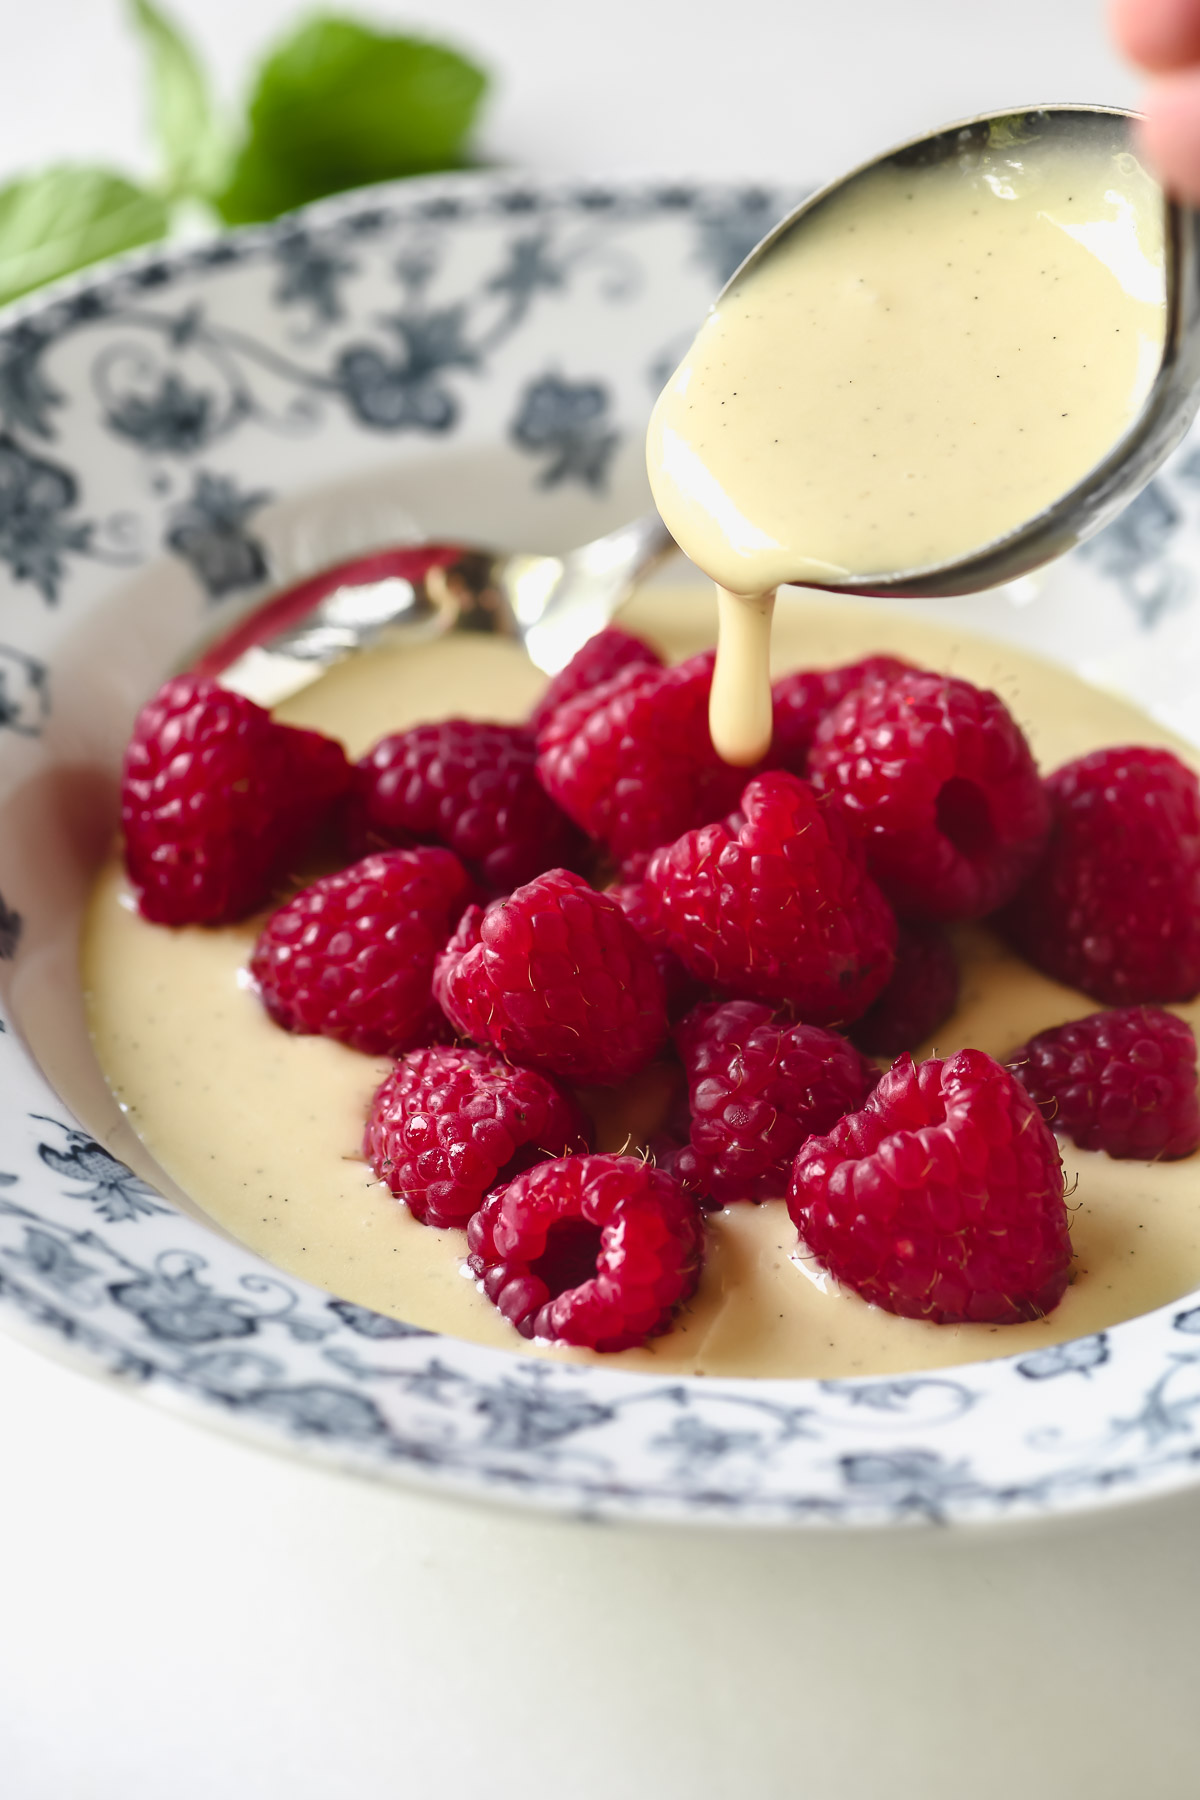 Spoon Creme Anglaise over fresh berries.